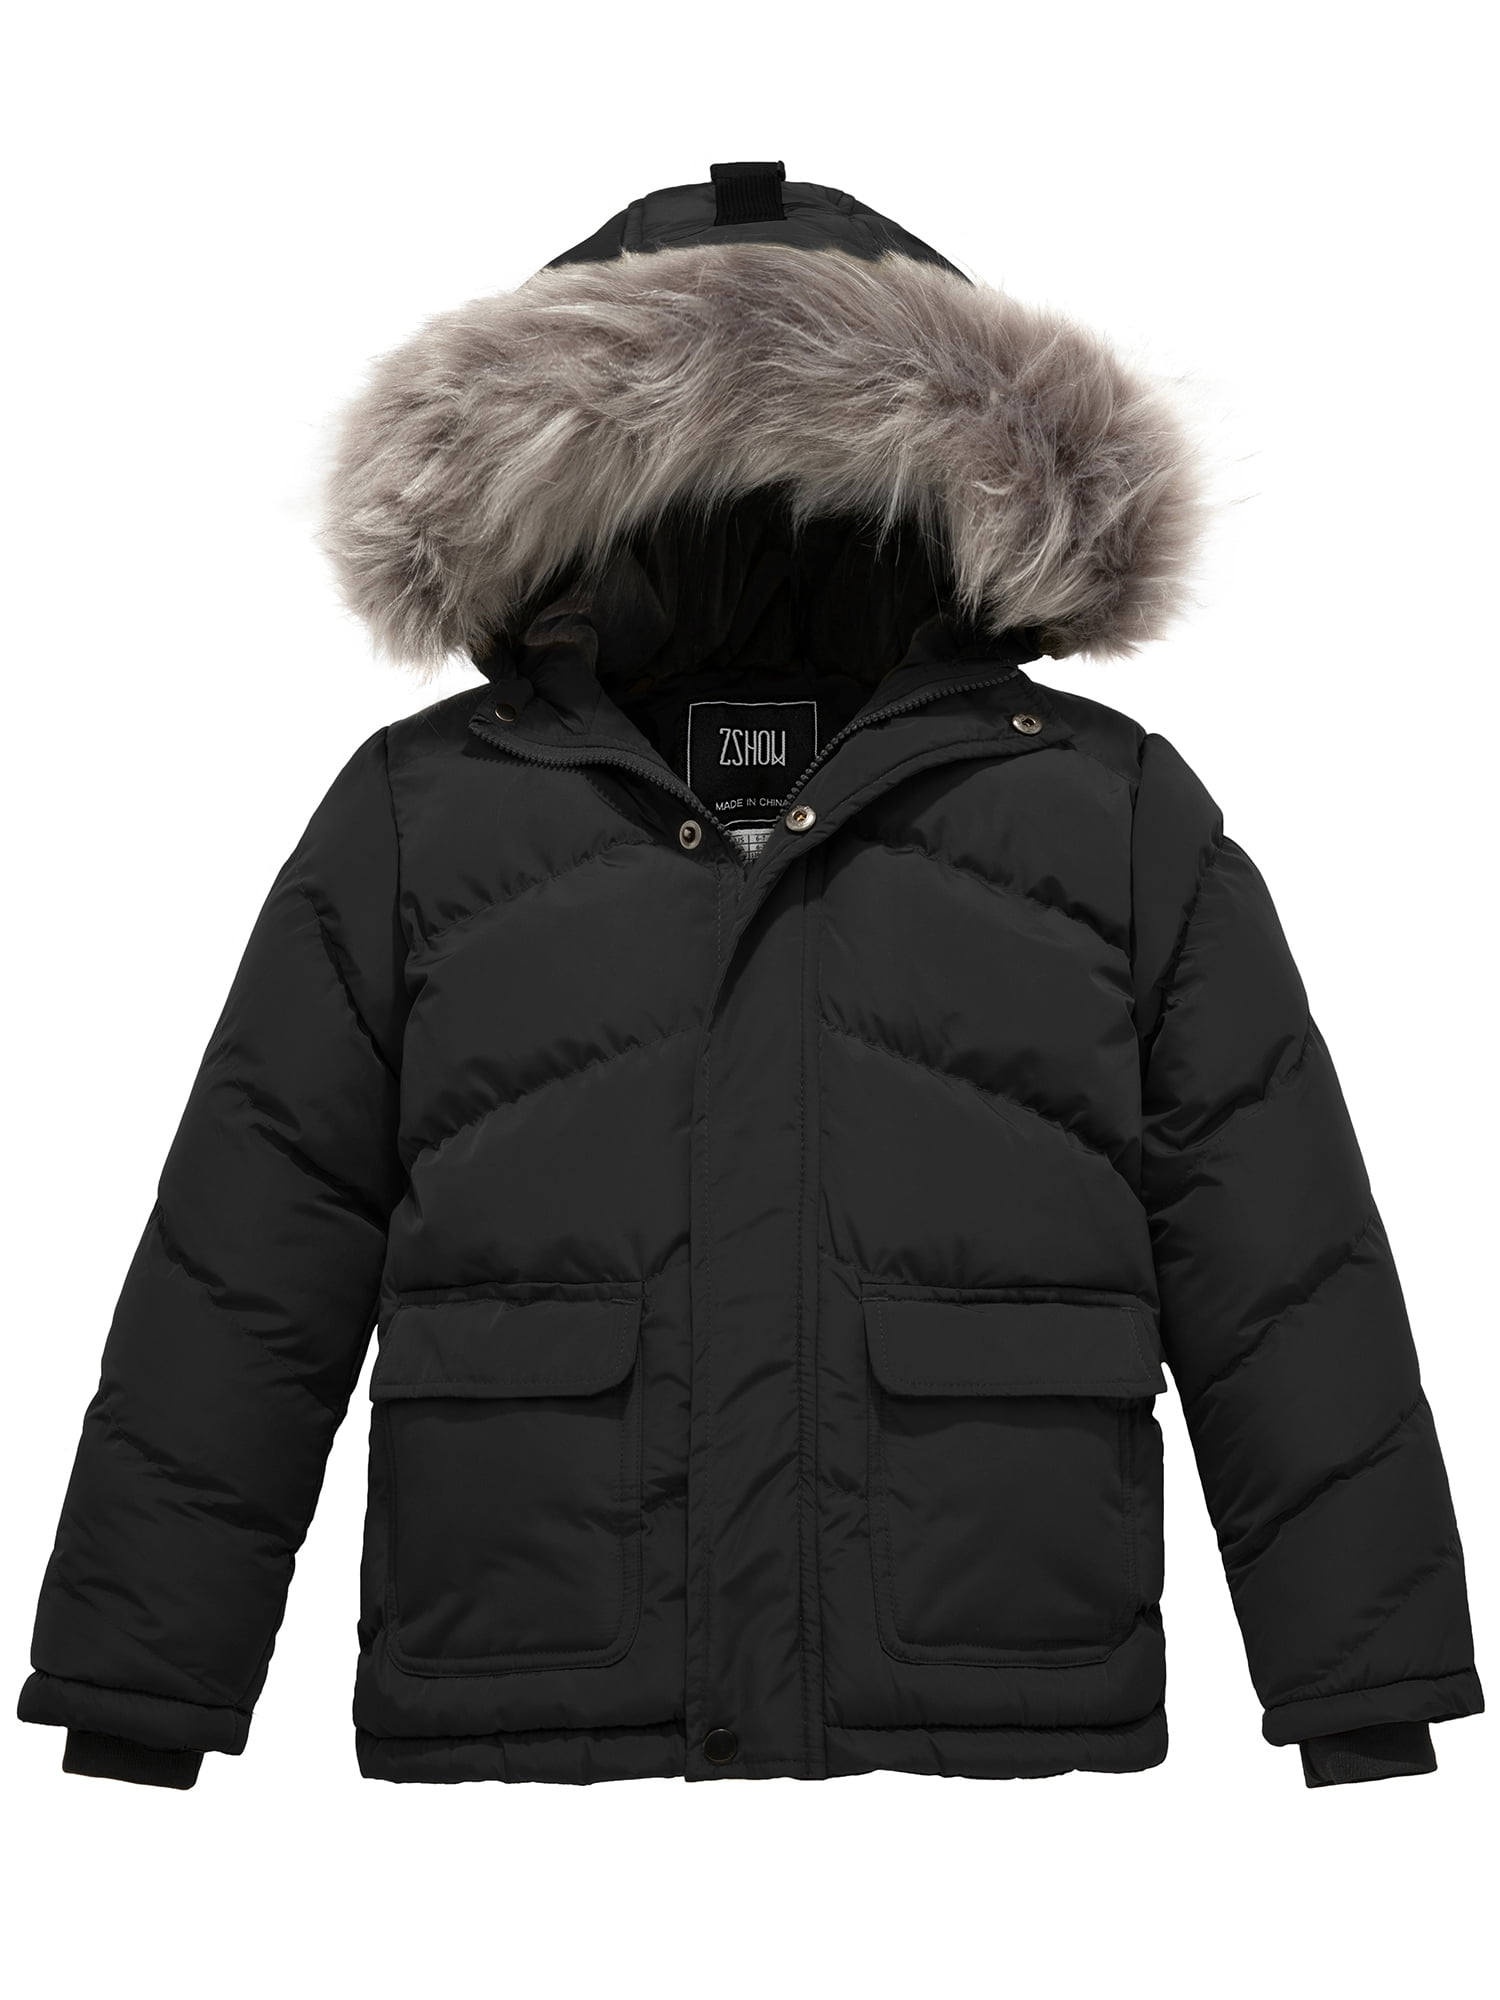 ZSHOW Boy's Puffer Jacket Warm Winter Jacket Quilted Outerwear Coat ...